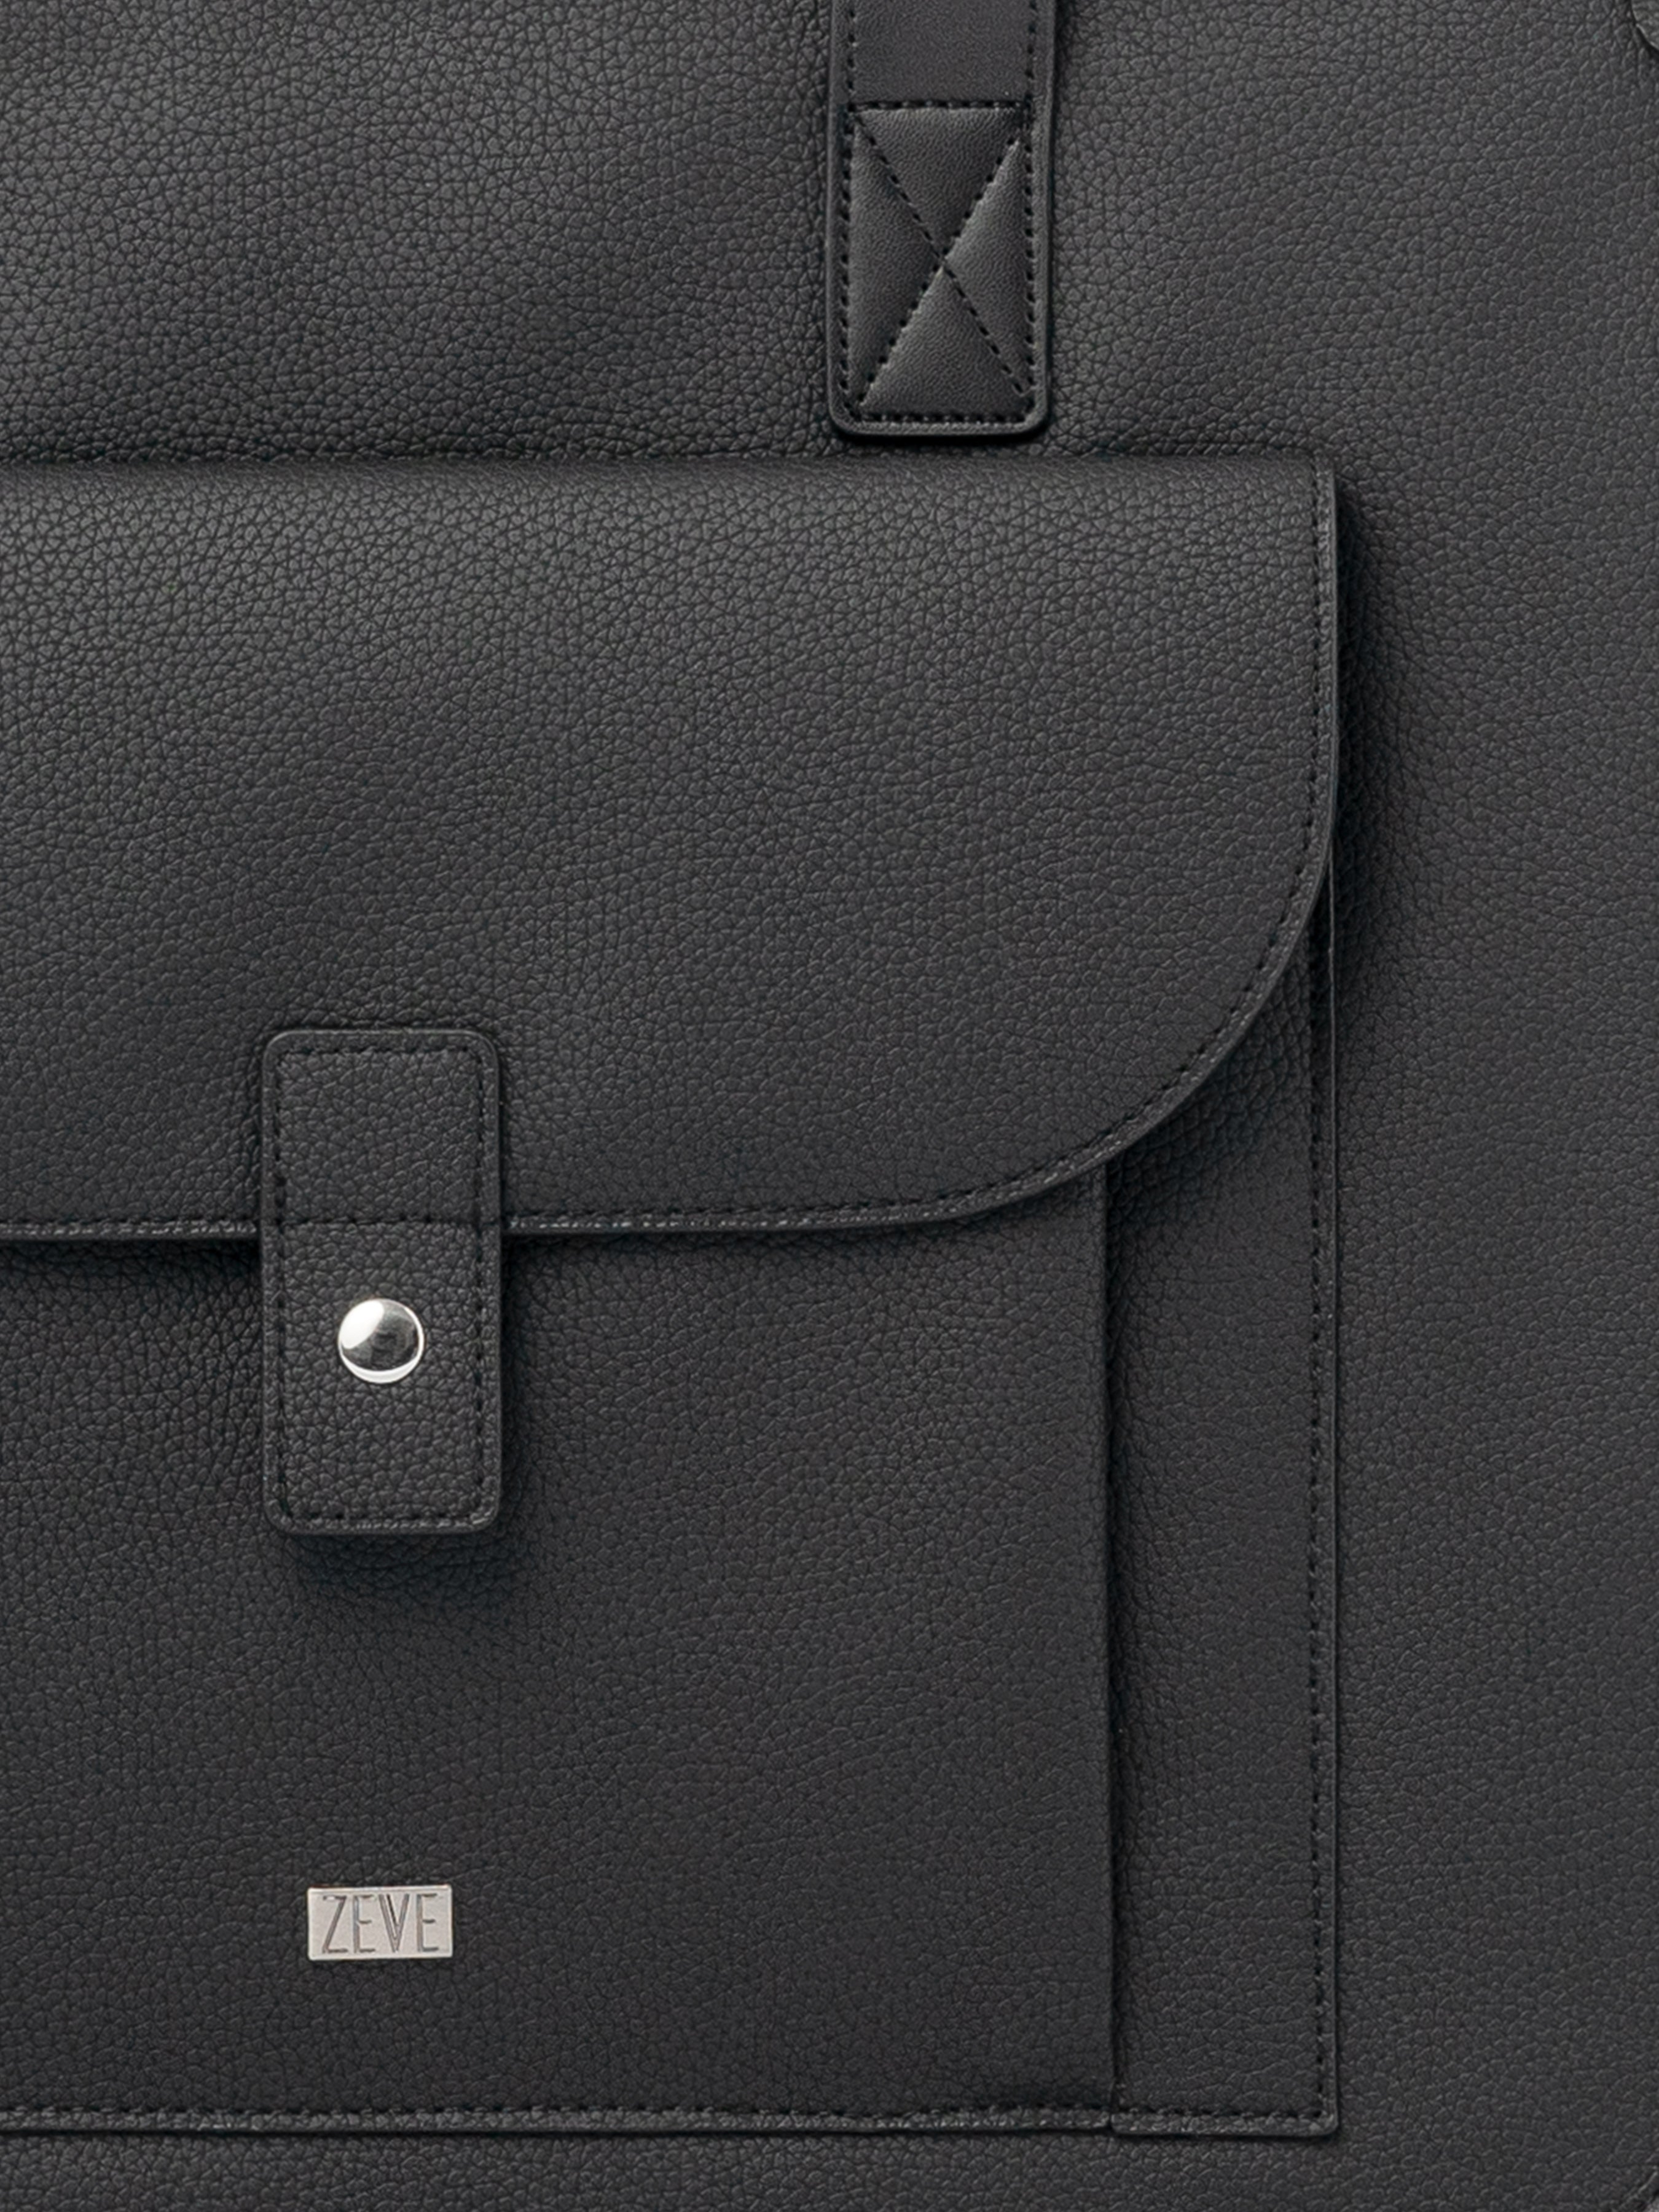 Ares Tote Bag With Zipper - Black Pebble